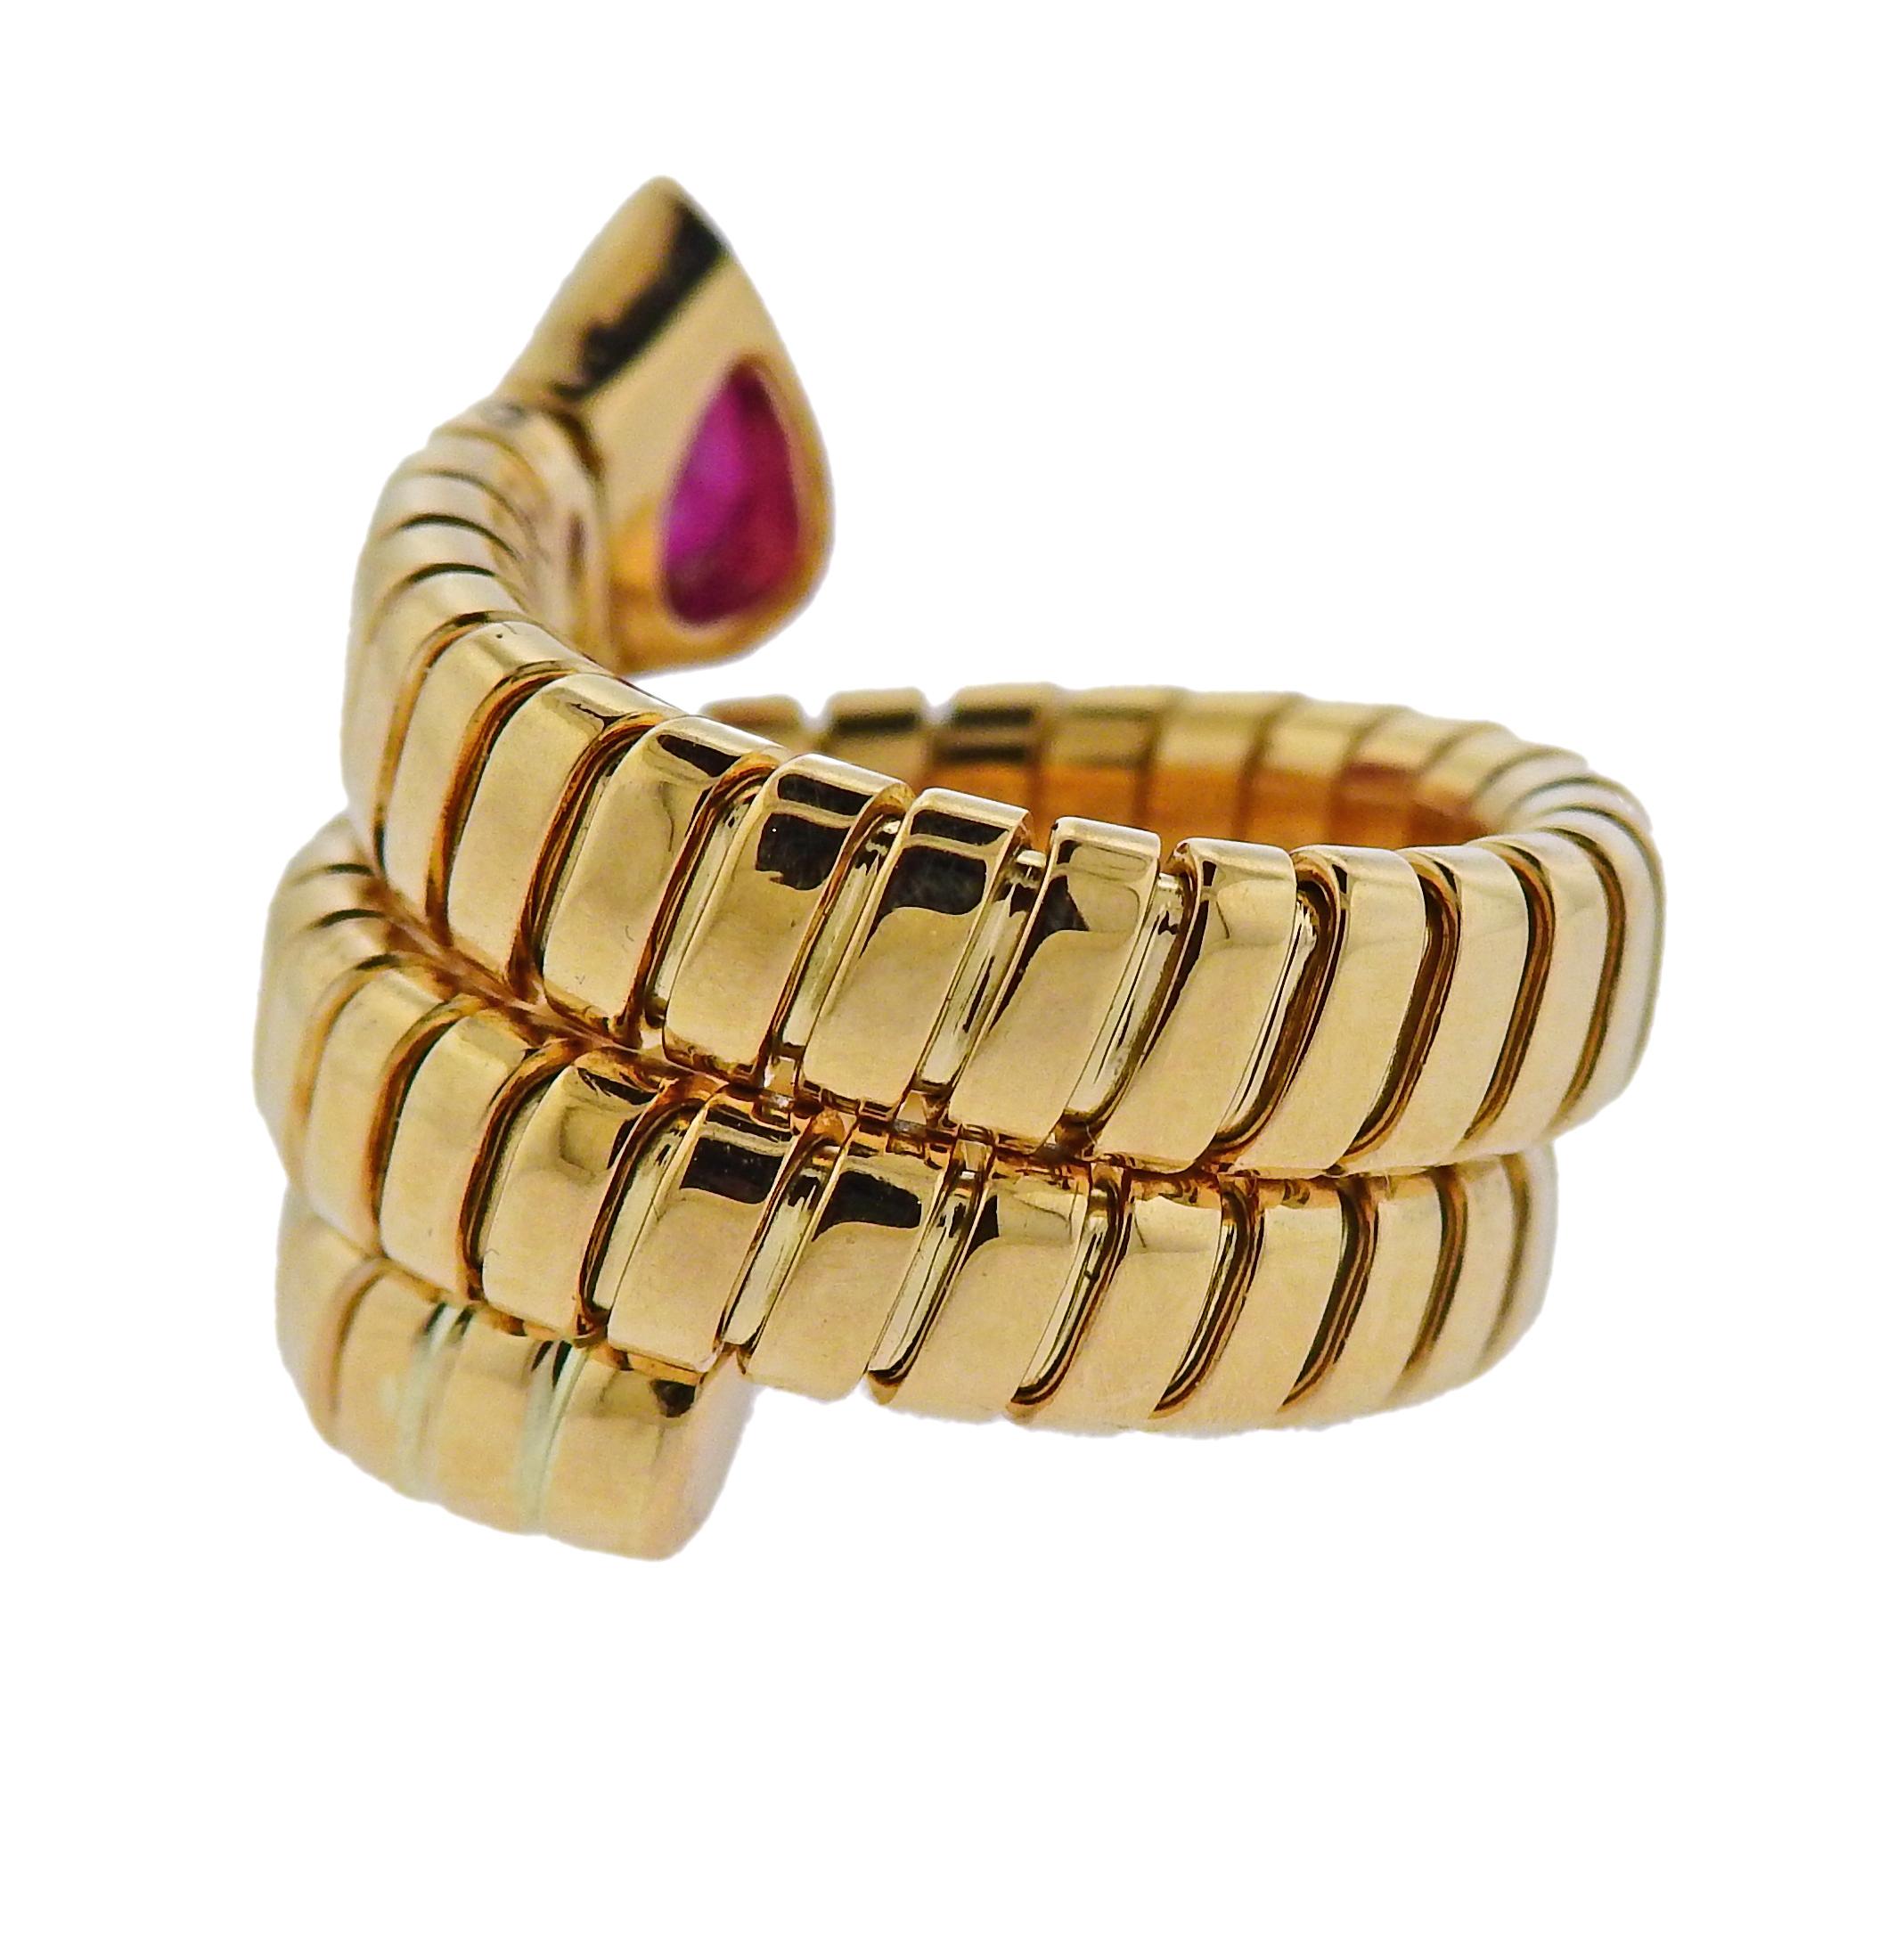 18k yellow gold wrap ring crafted by Bulgari for the Tubogas collection. Features ruby.  Ring size 6 (slightly flexible) width- 18mm wide. Weighs 16.2 grams.  Marked: Bulgari 750 Italian Marks.